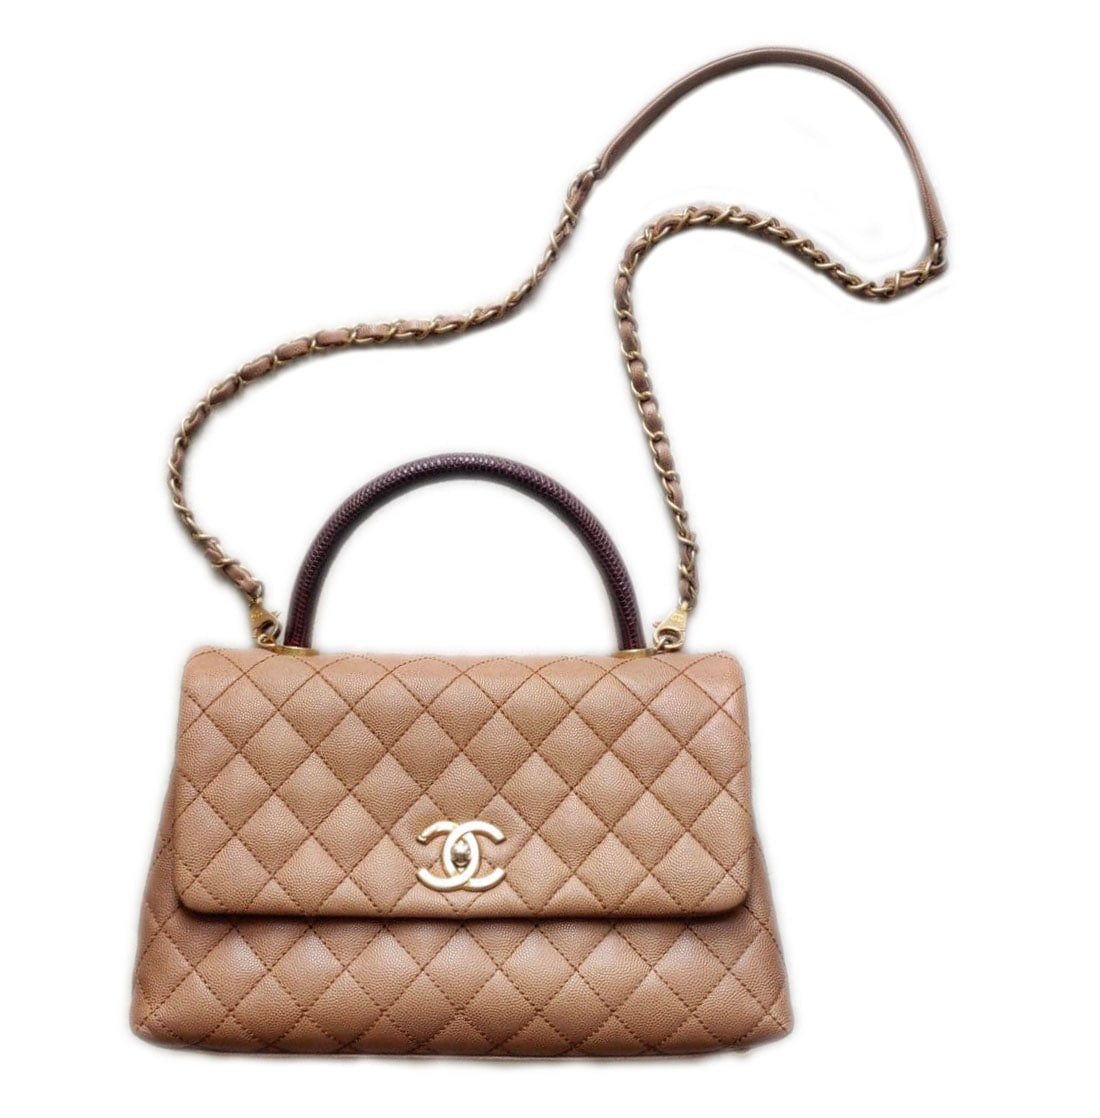 Buy pre-owned Chanel Coco Handle Medium Caviar Bag | The marketplace for  luxury